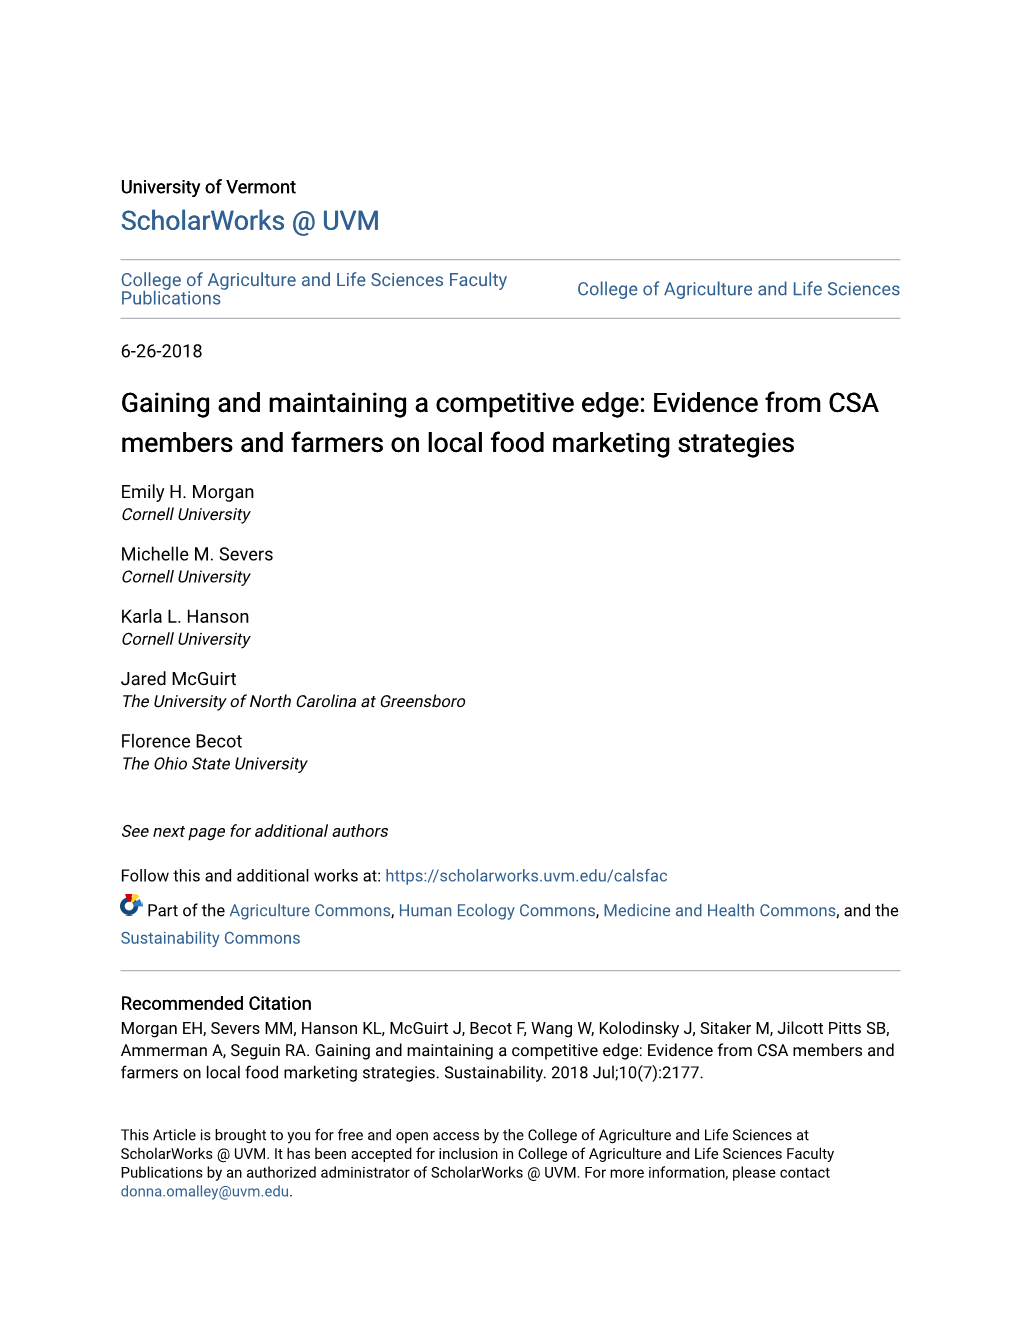 Evidence from CSA Members and Farmers on Local Food Marketing Strategies